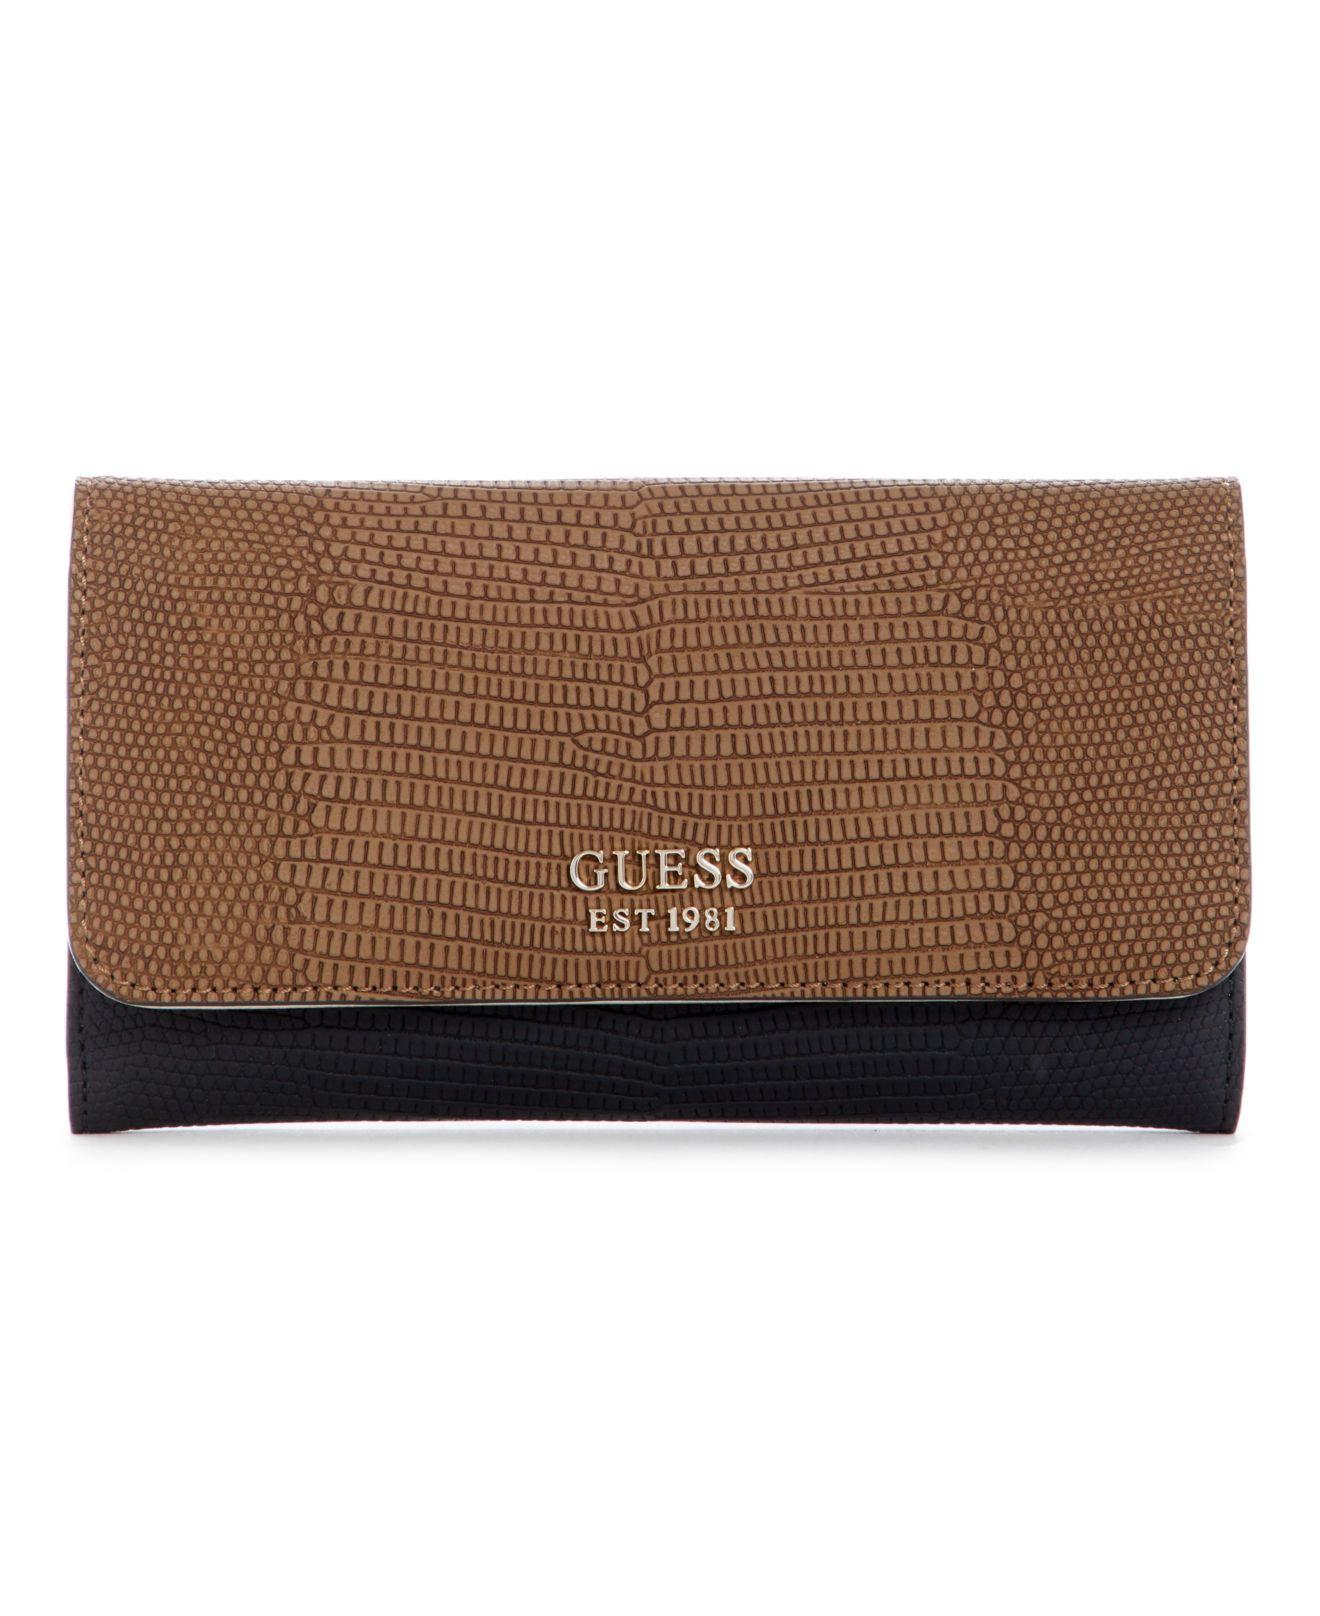 GUESS Asher Multi Clutch Wallet